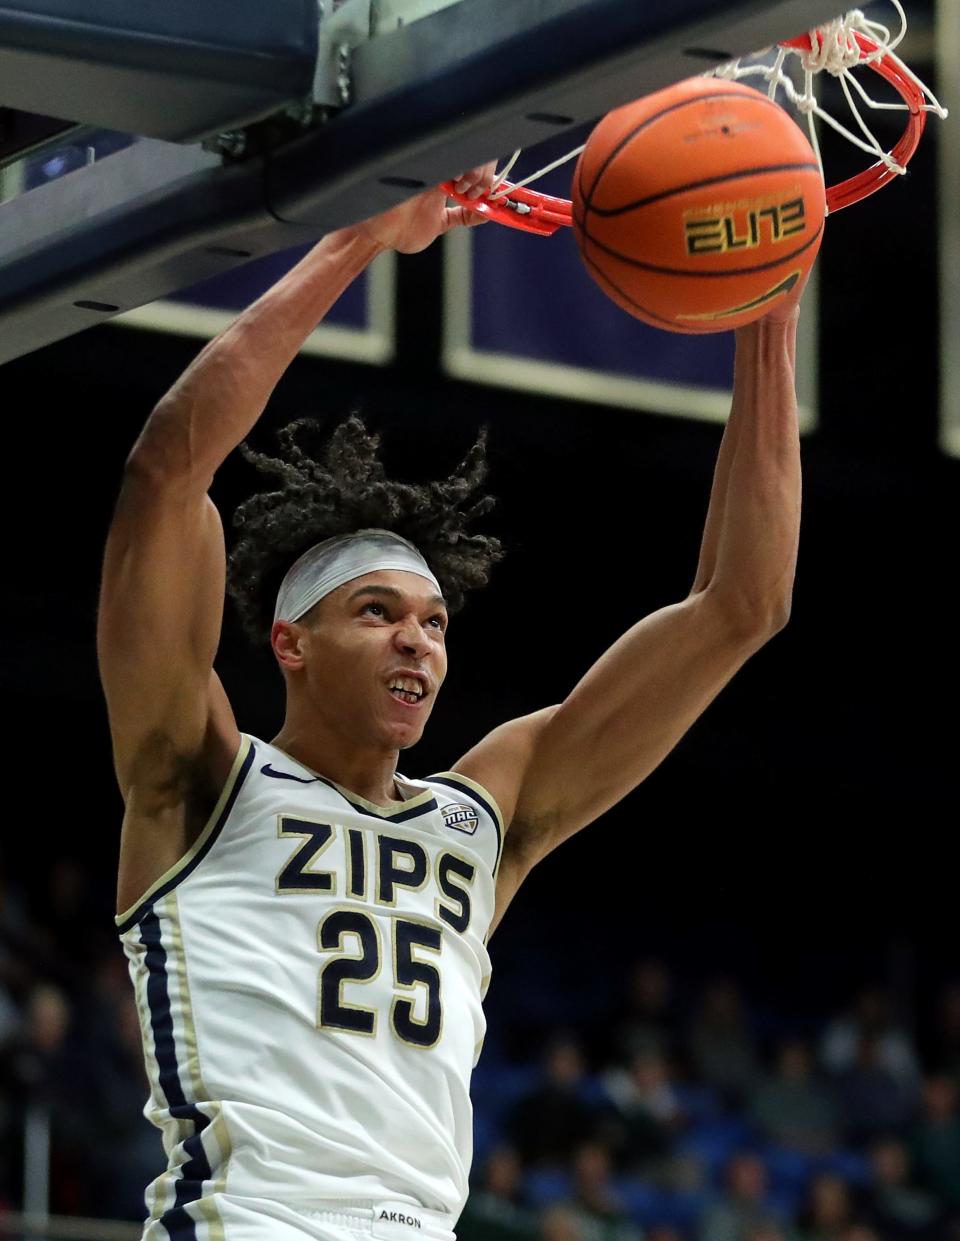 Akron Zips forward Enrique Freeman dunks in the first half against Ohio on Tuesday in Akron.